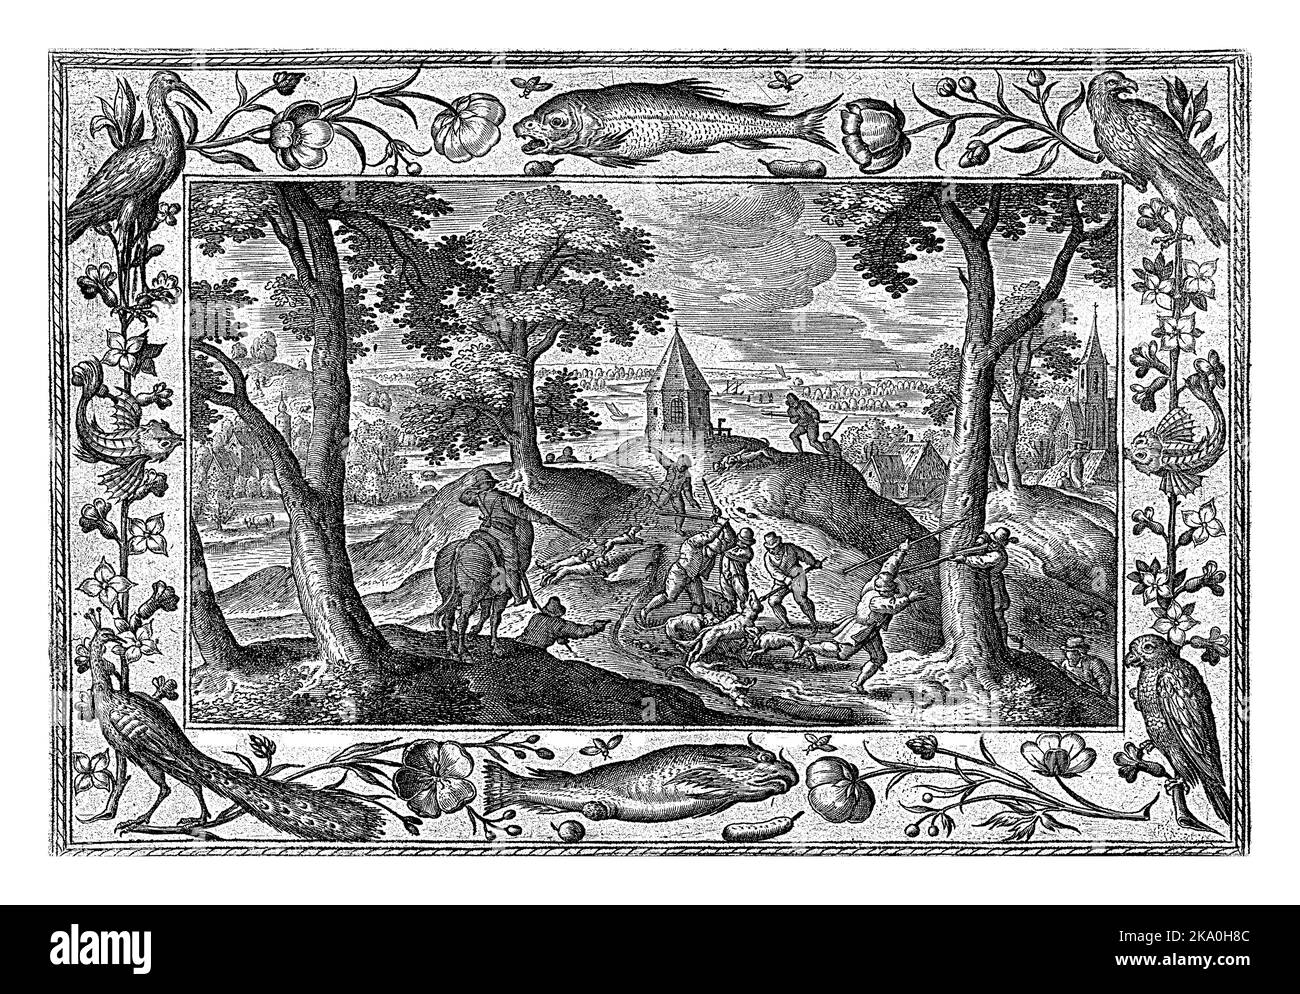 Forest landscape with wolf hunting. In the foreground, a wolf is killed by some hunters and their dogs. The print has an ornamental frame with flowers Stock Photo